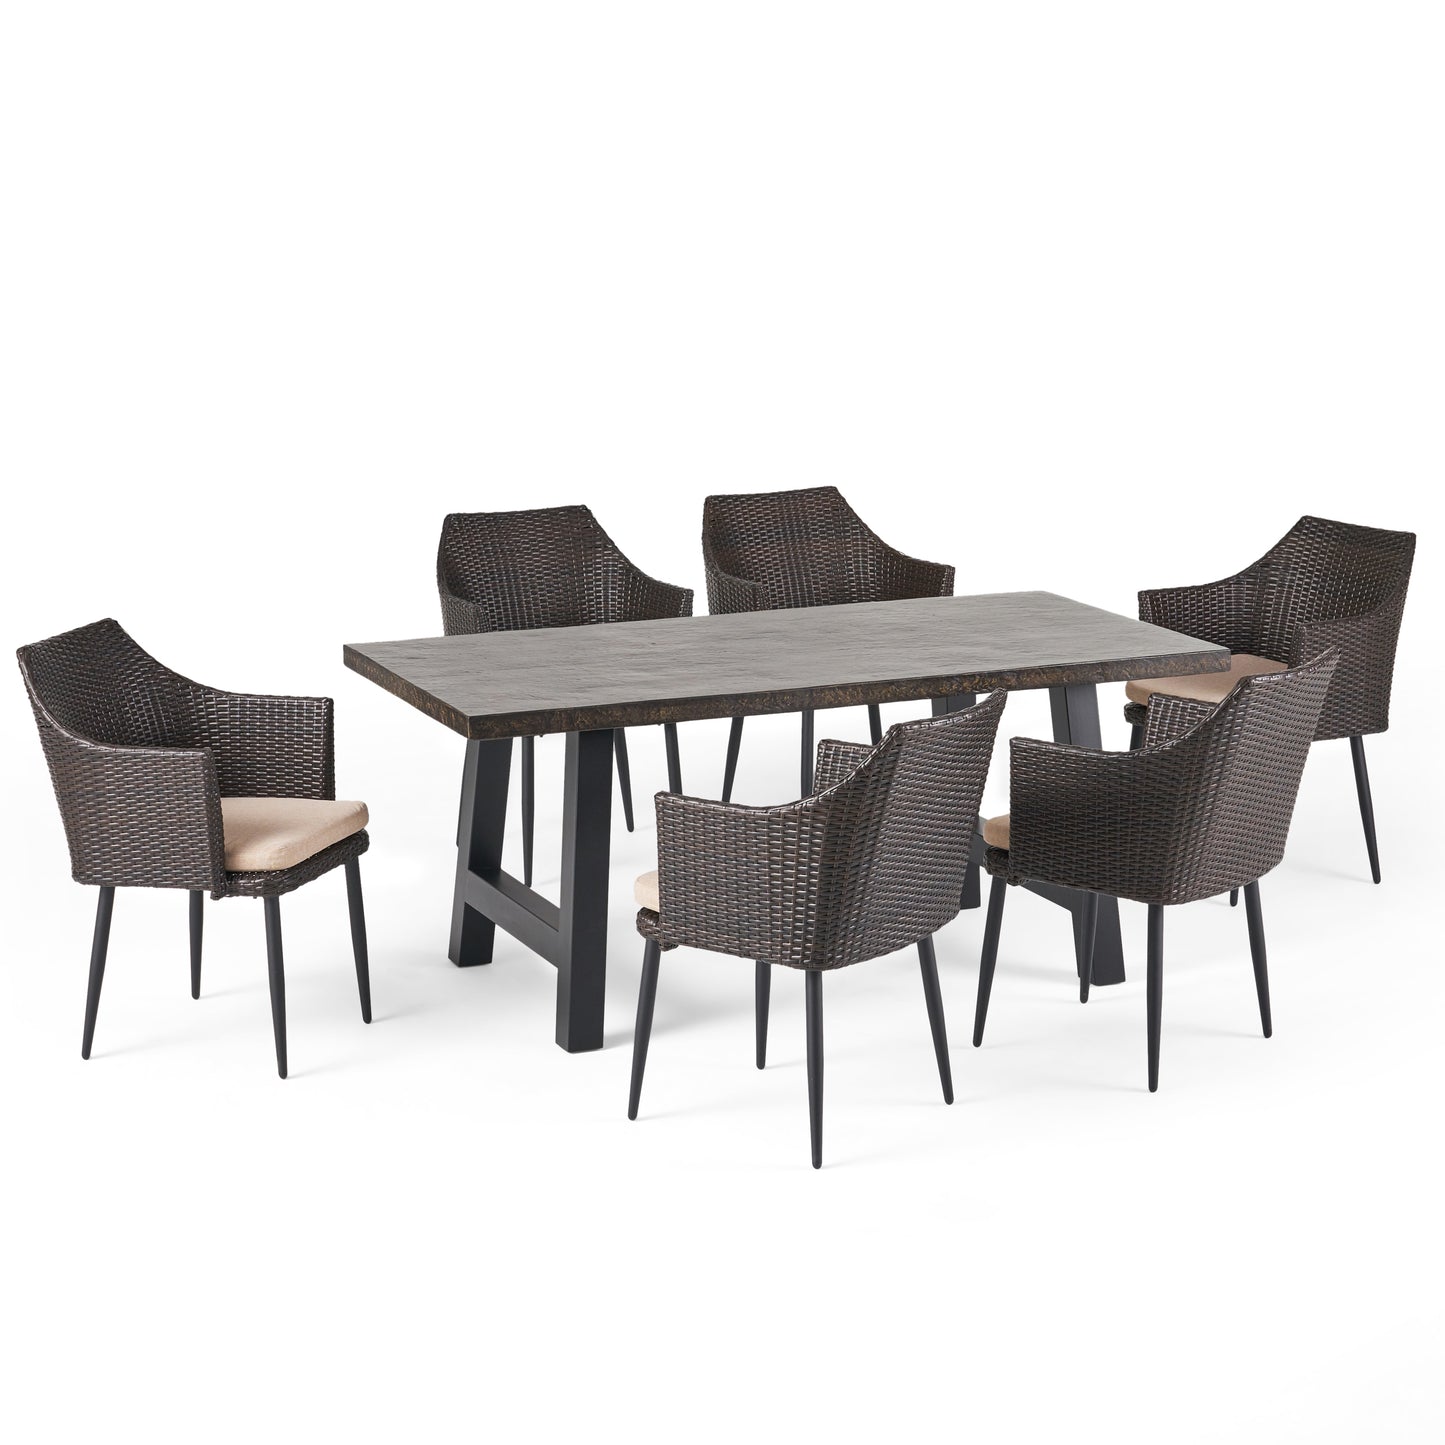 Noah Outdoor 7 Piece Wicker Dining Set with Light Weight Concrete Dining Table